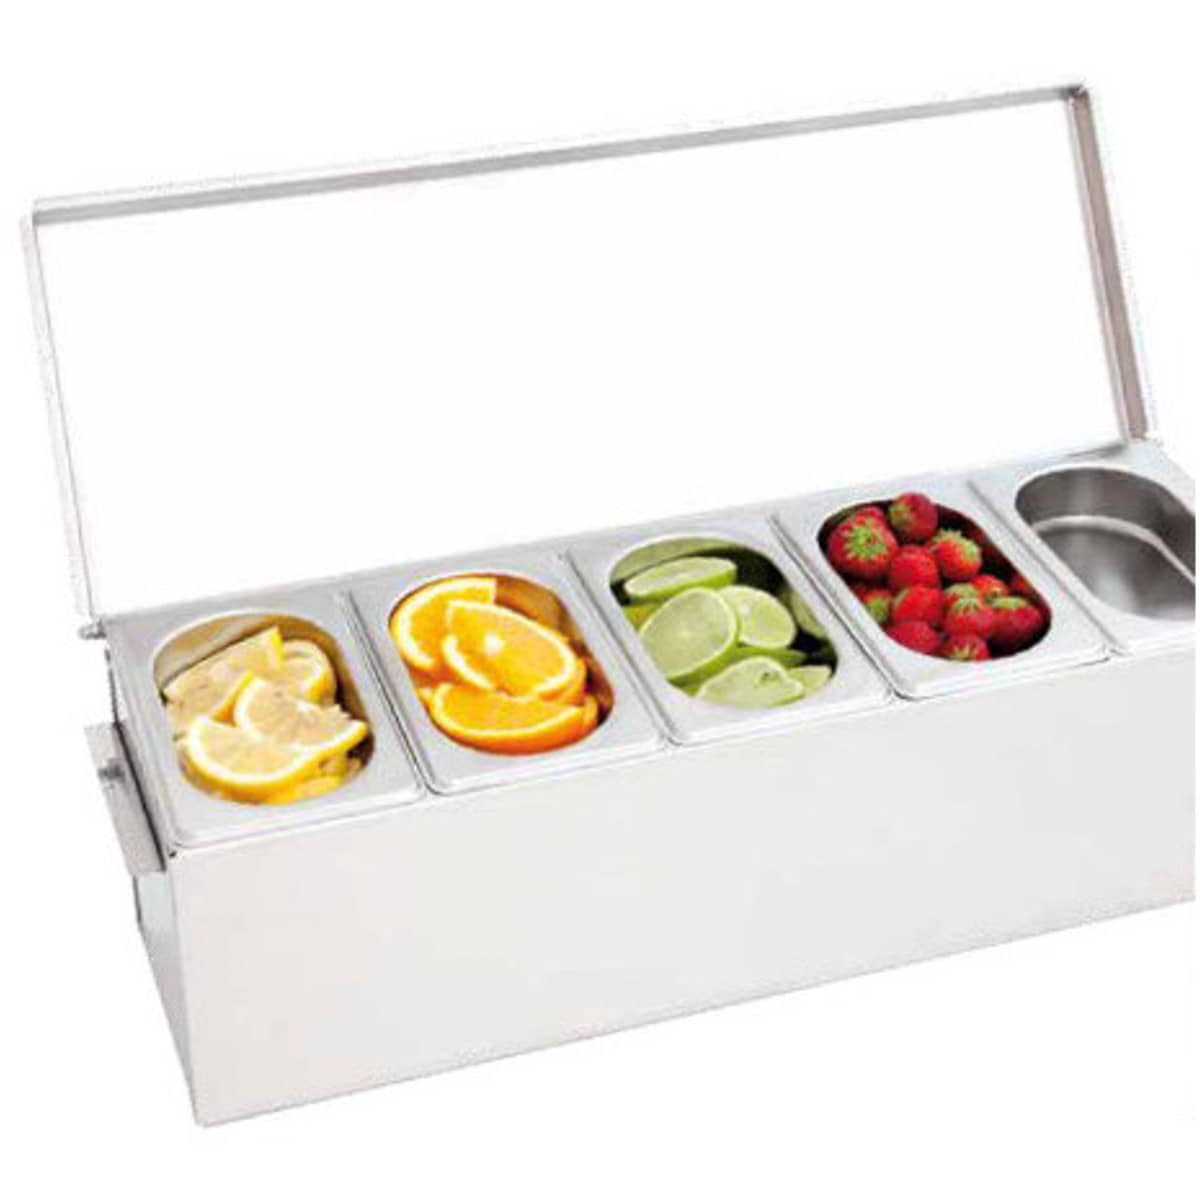 Cooled condiment holder 5 containers - Italian cooking store